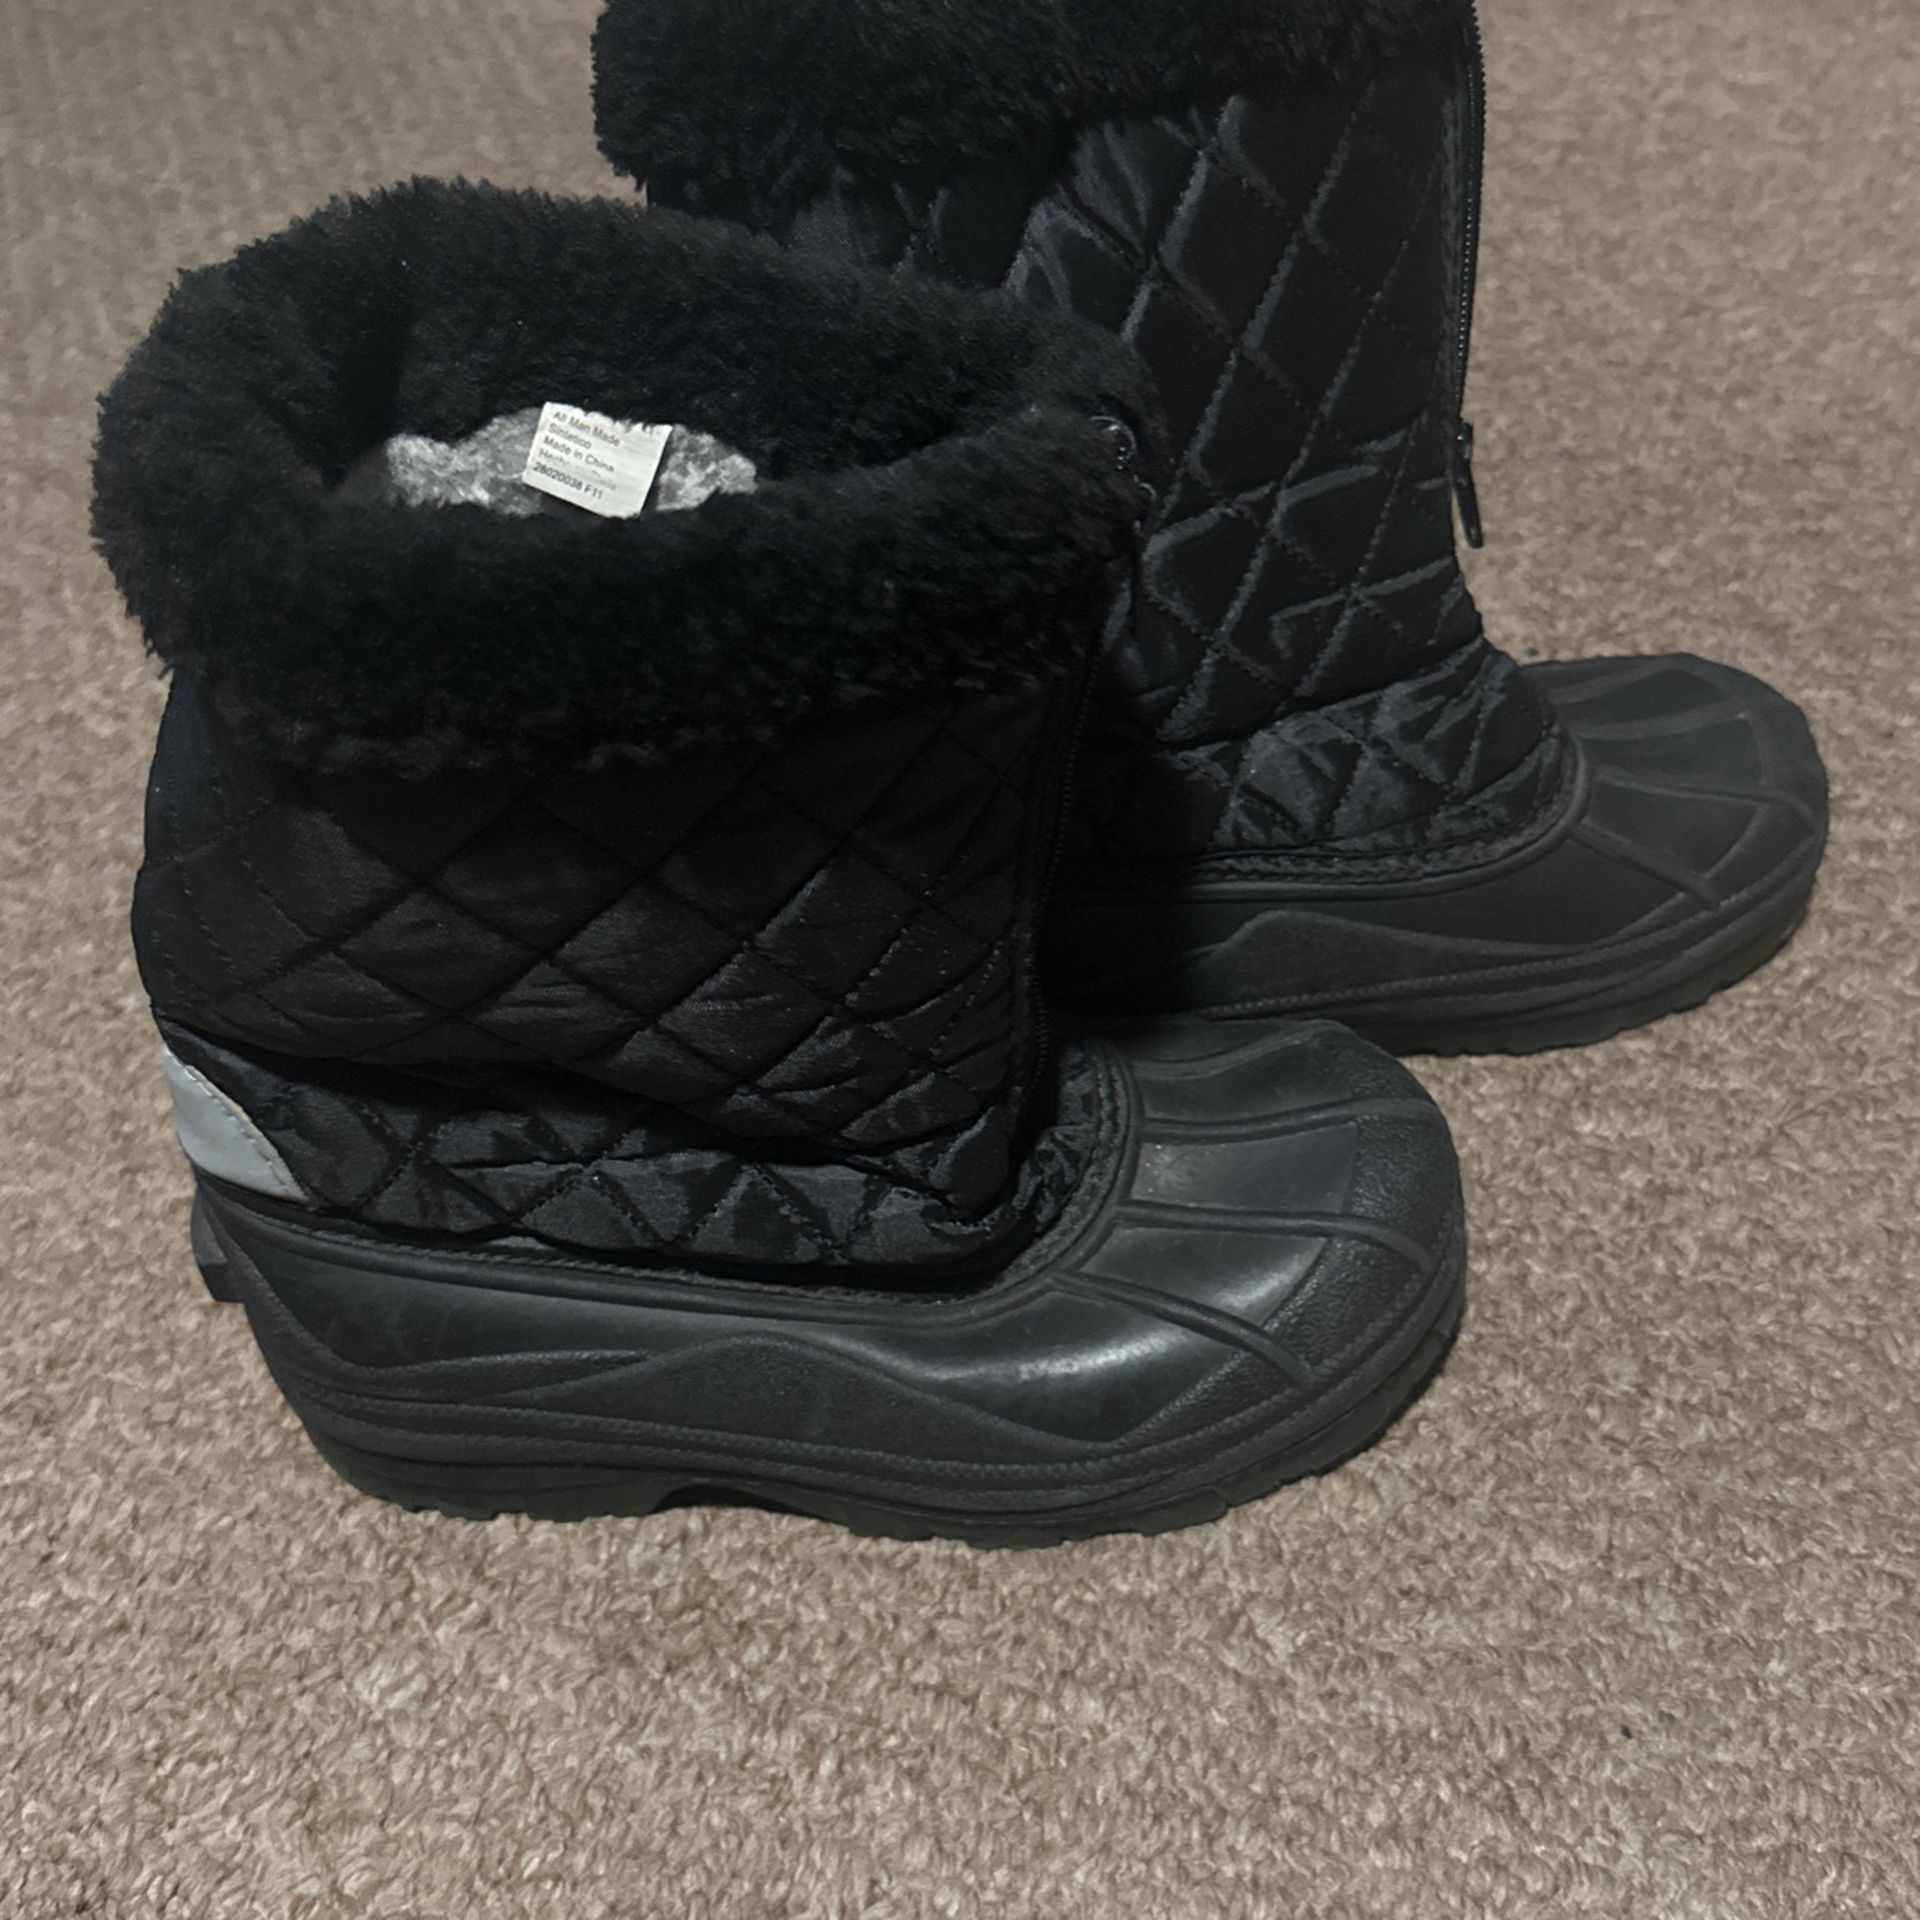 Girls Snow Boots for Sale in Bell Gardens, CA - OfferUp